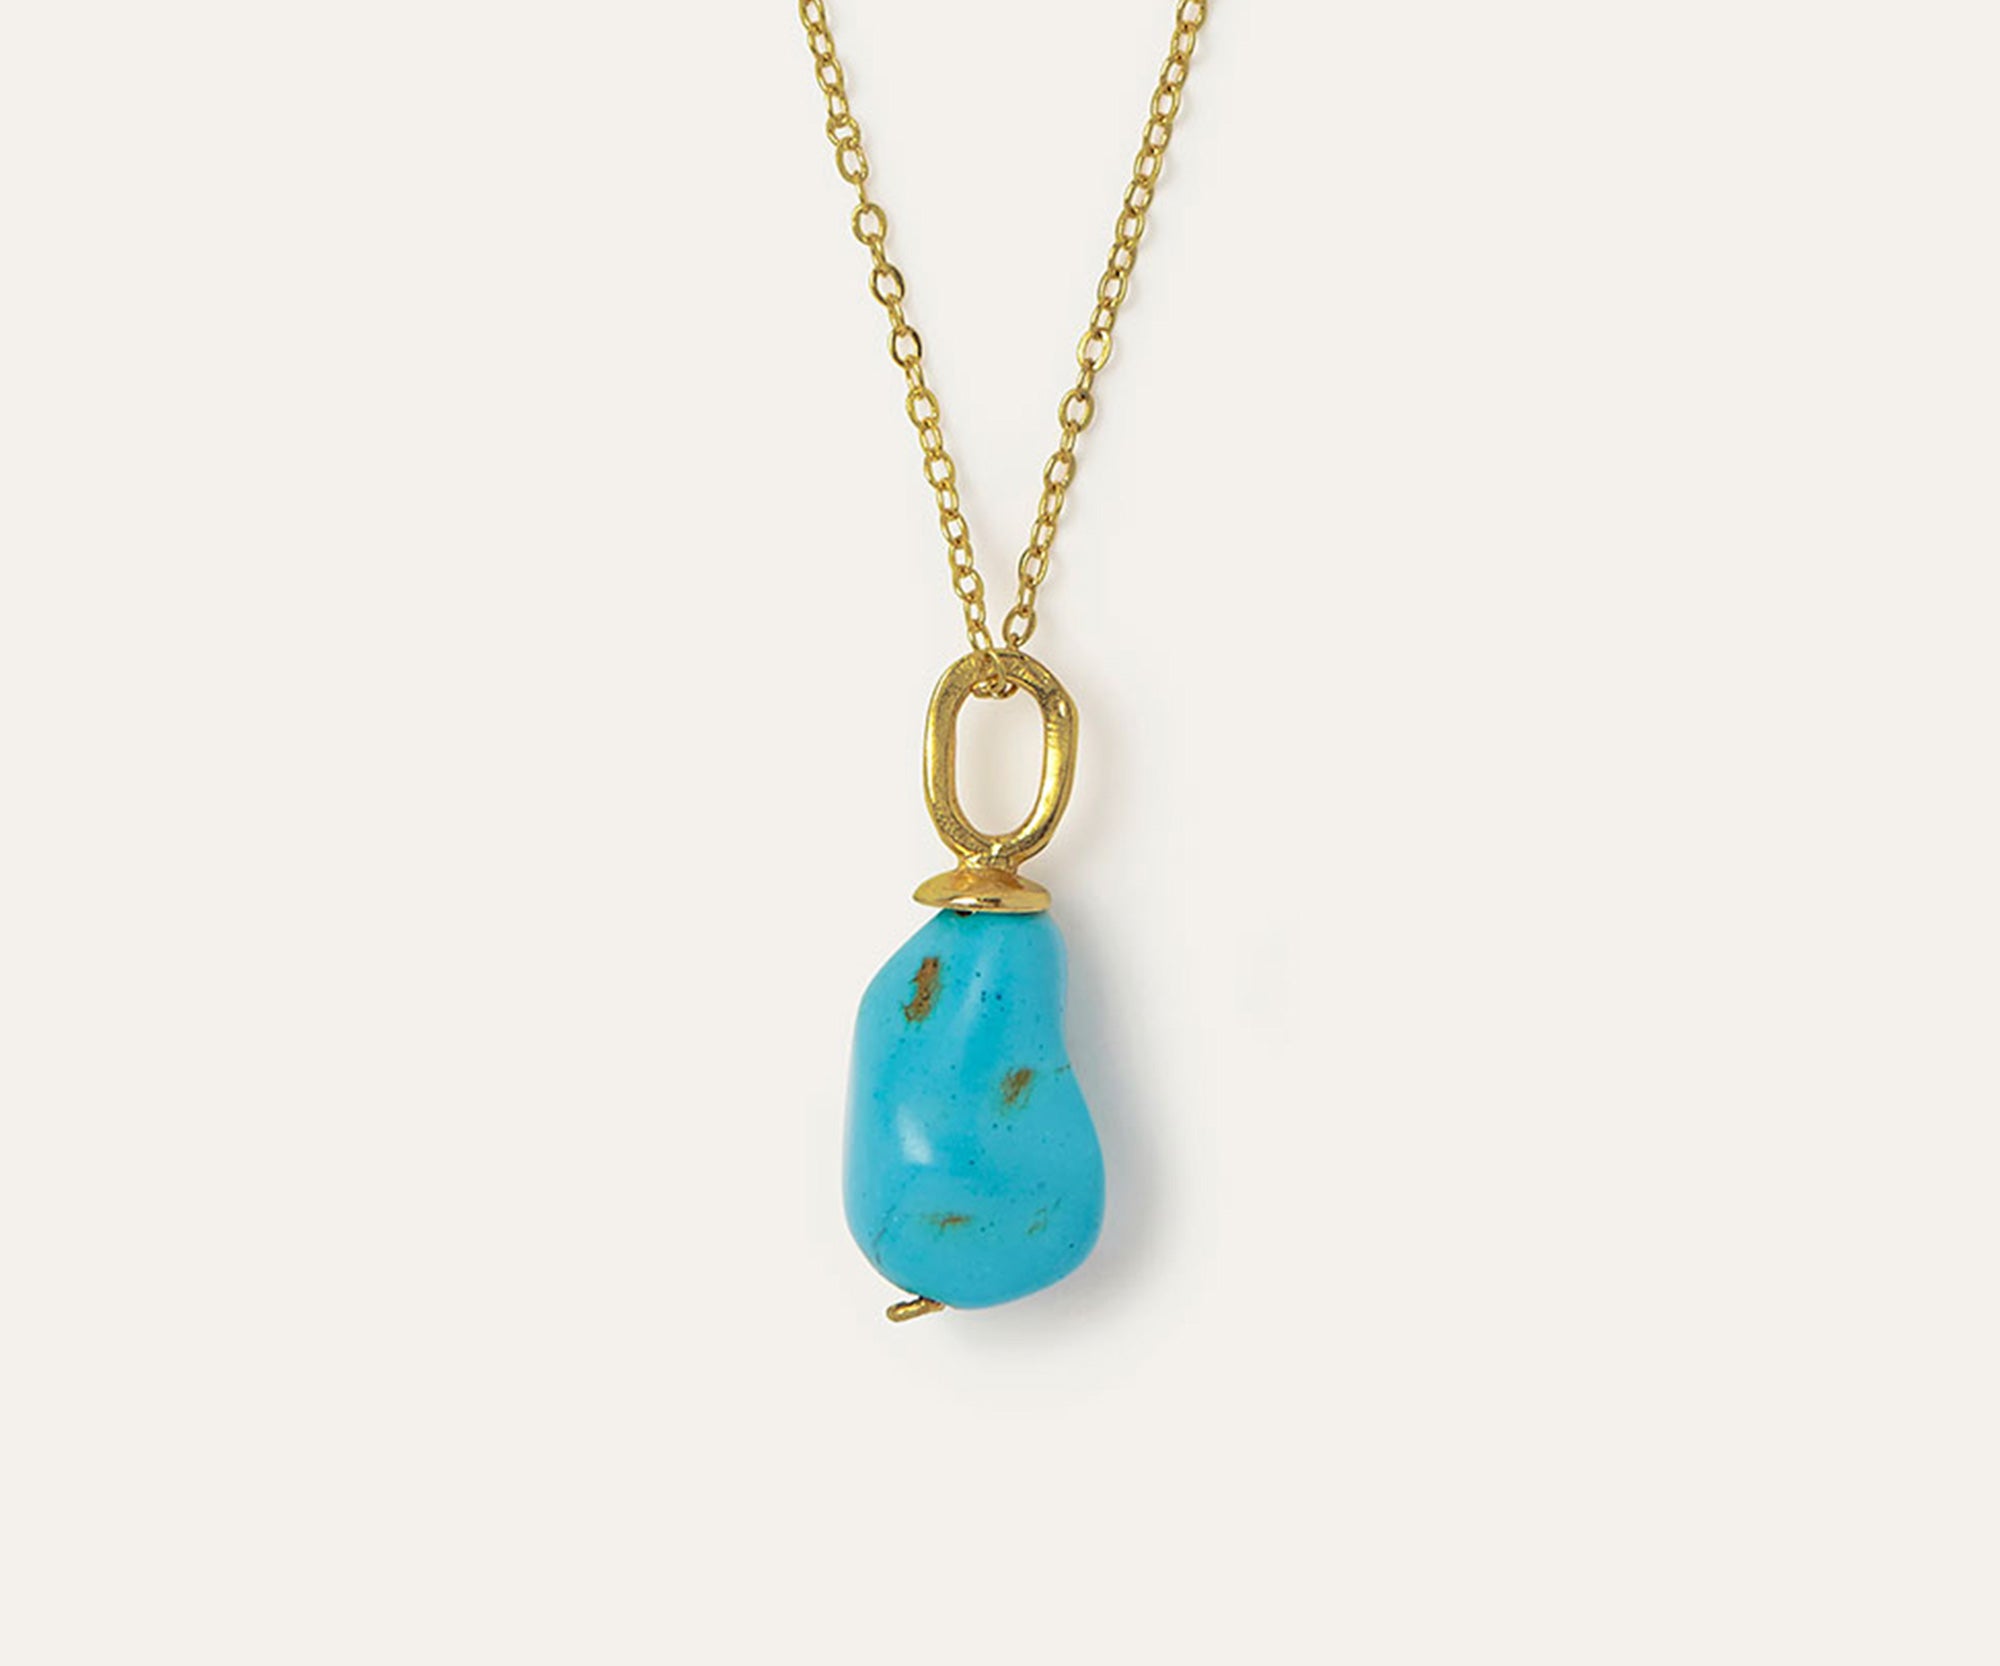 Ava Turquoise Pendant Necklace | Sustainable Jewellery by Ottoman Hands